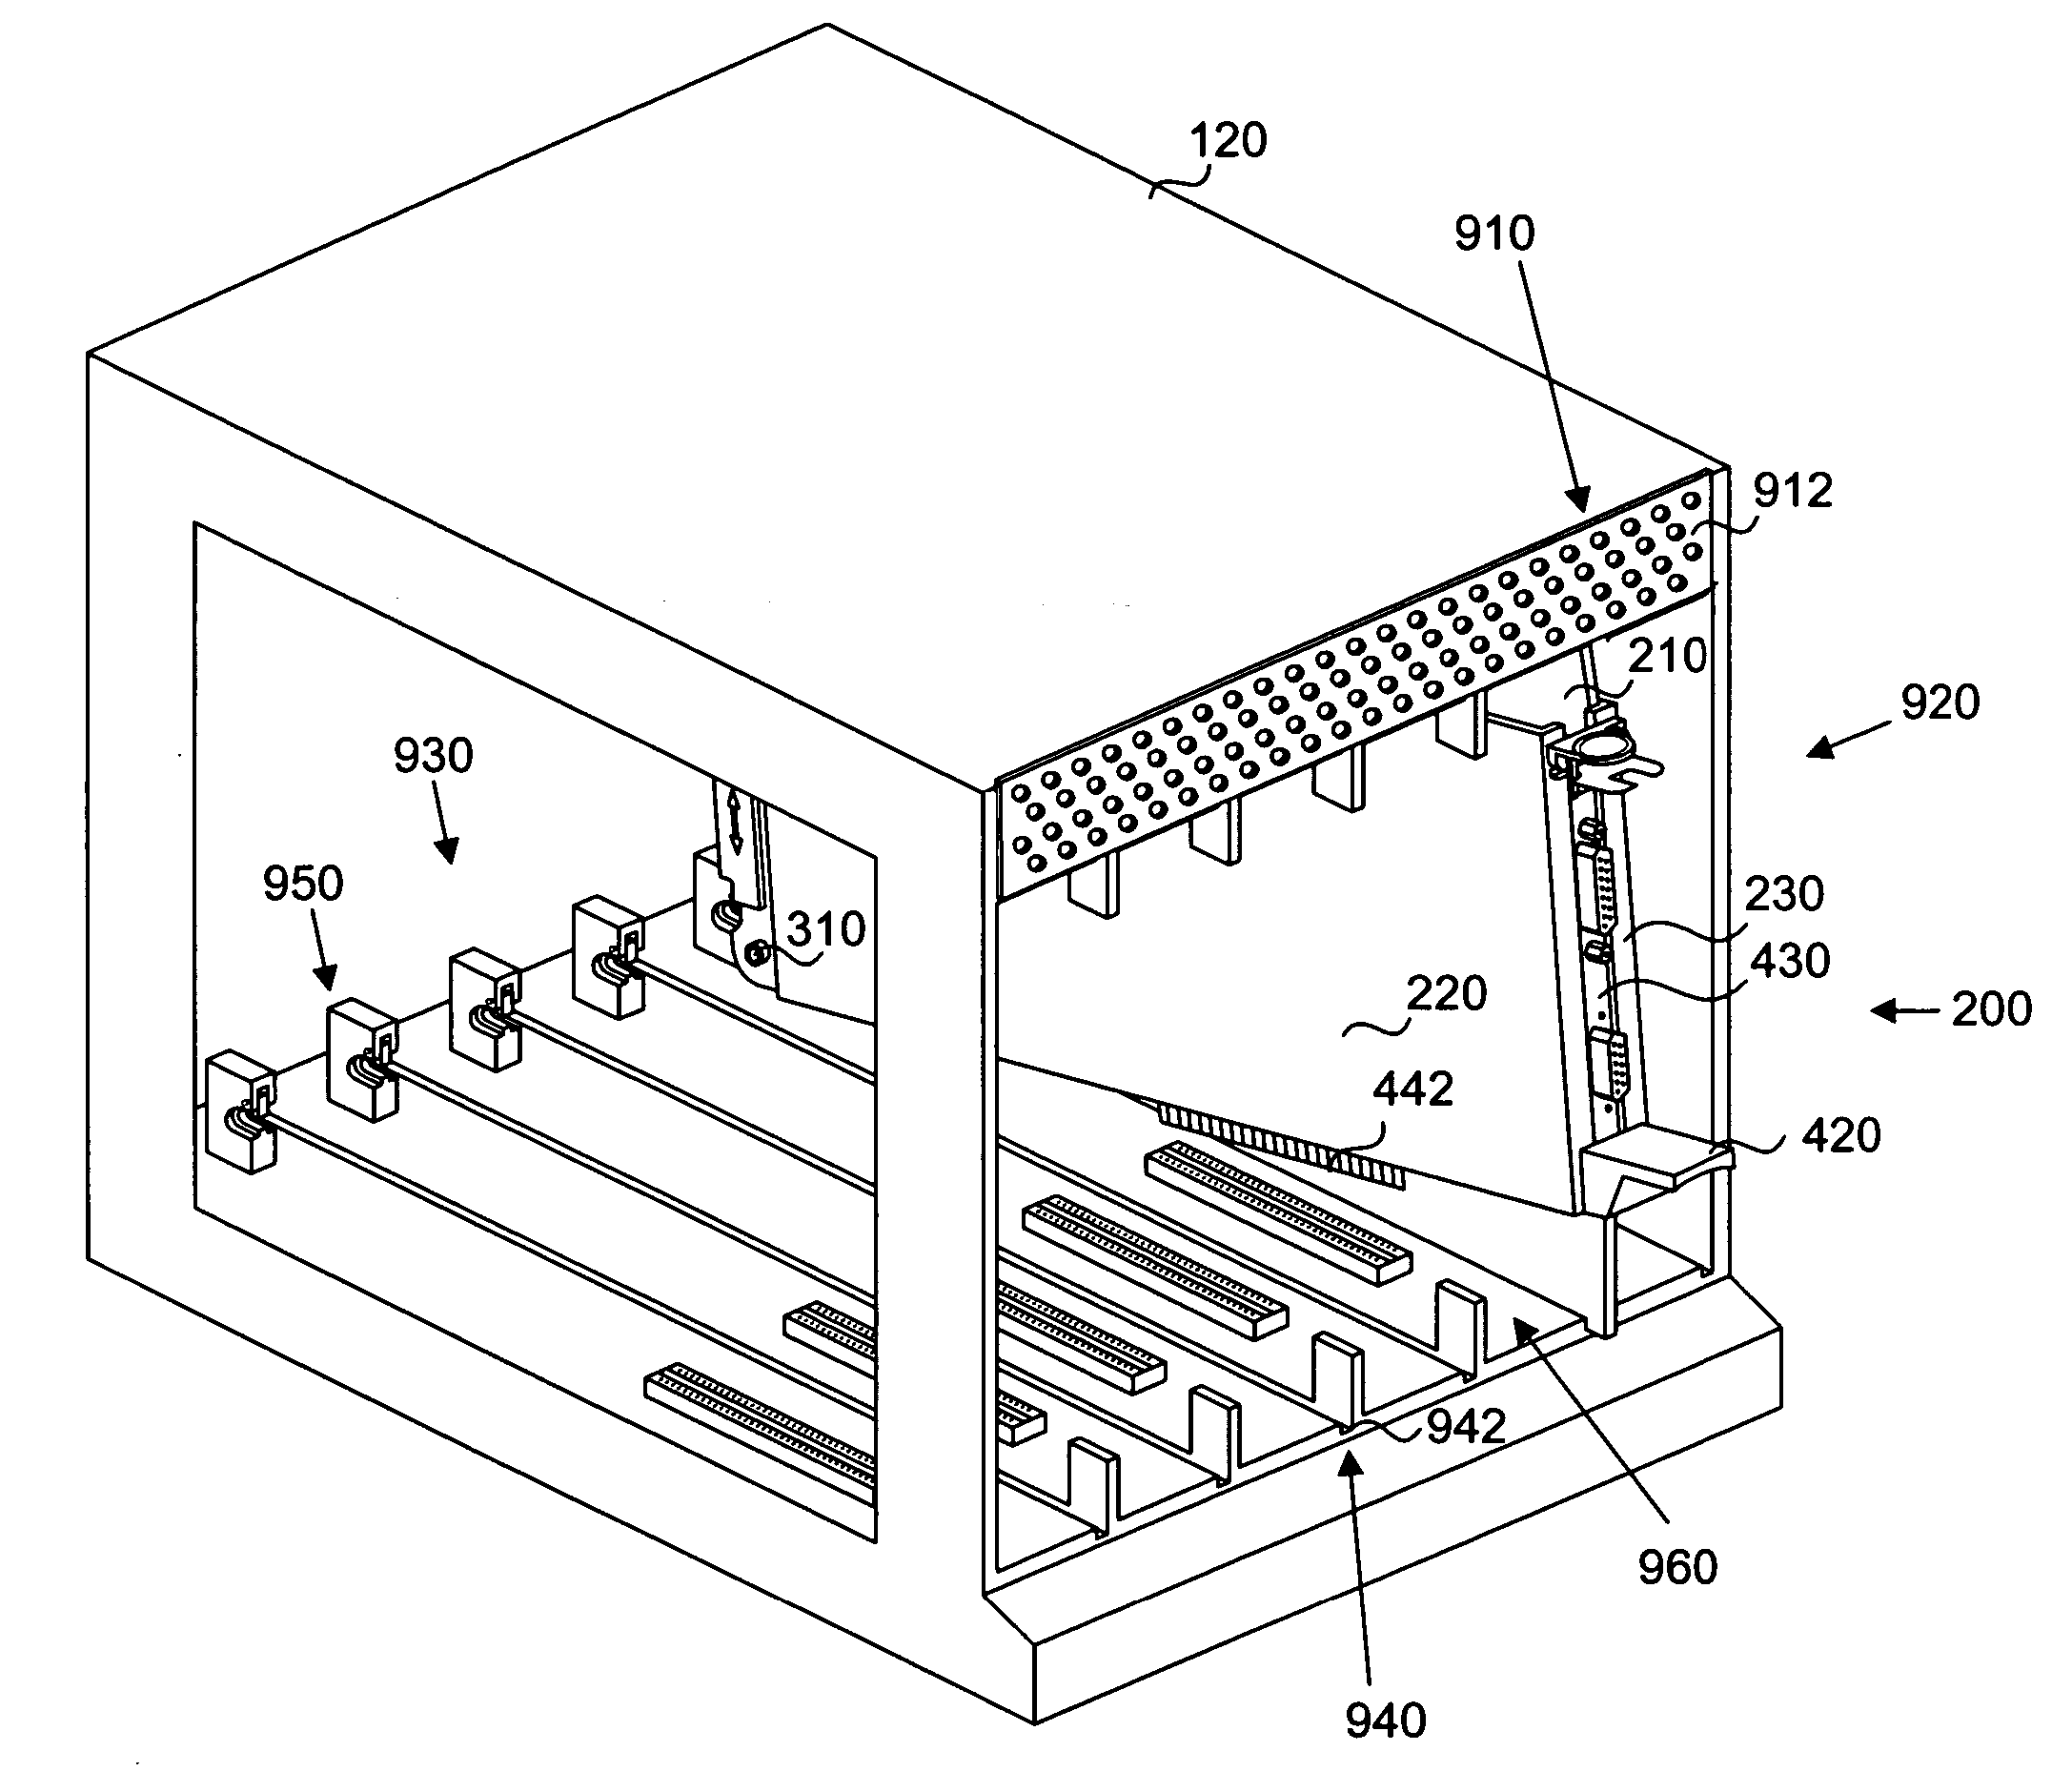 Apparatus, system, and method for pivotal installation and removal of an expansion card